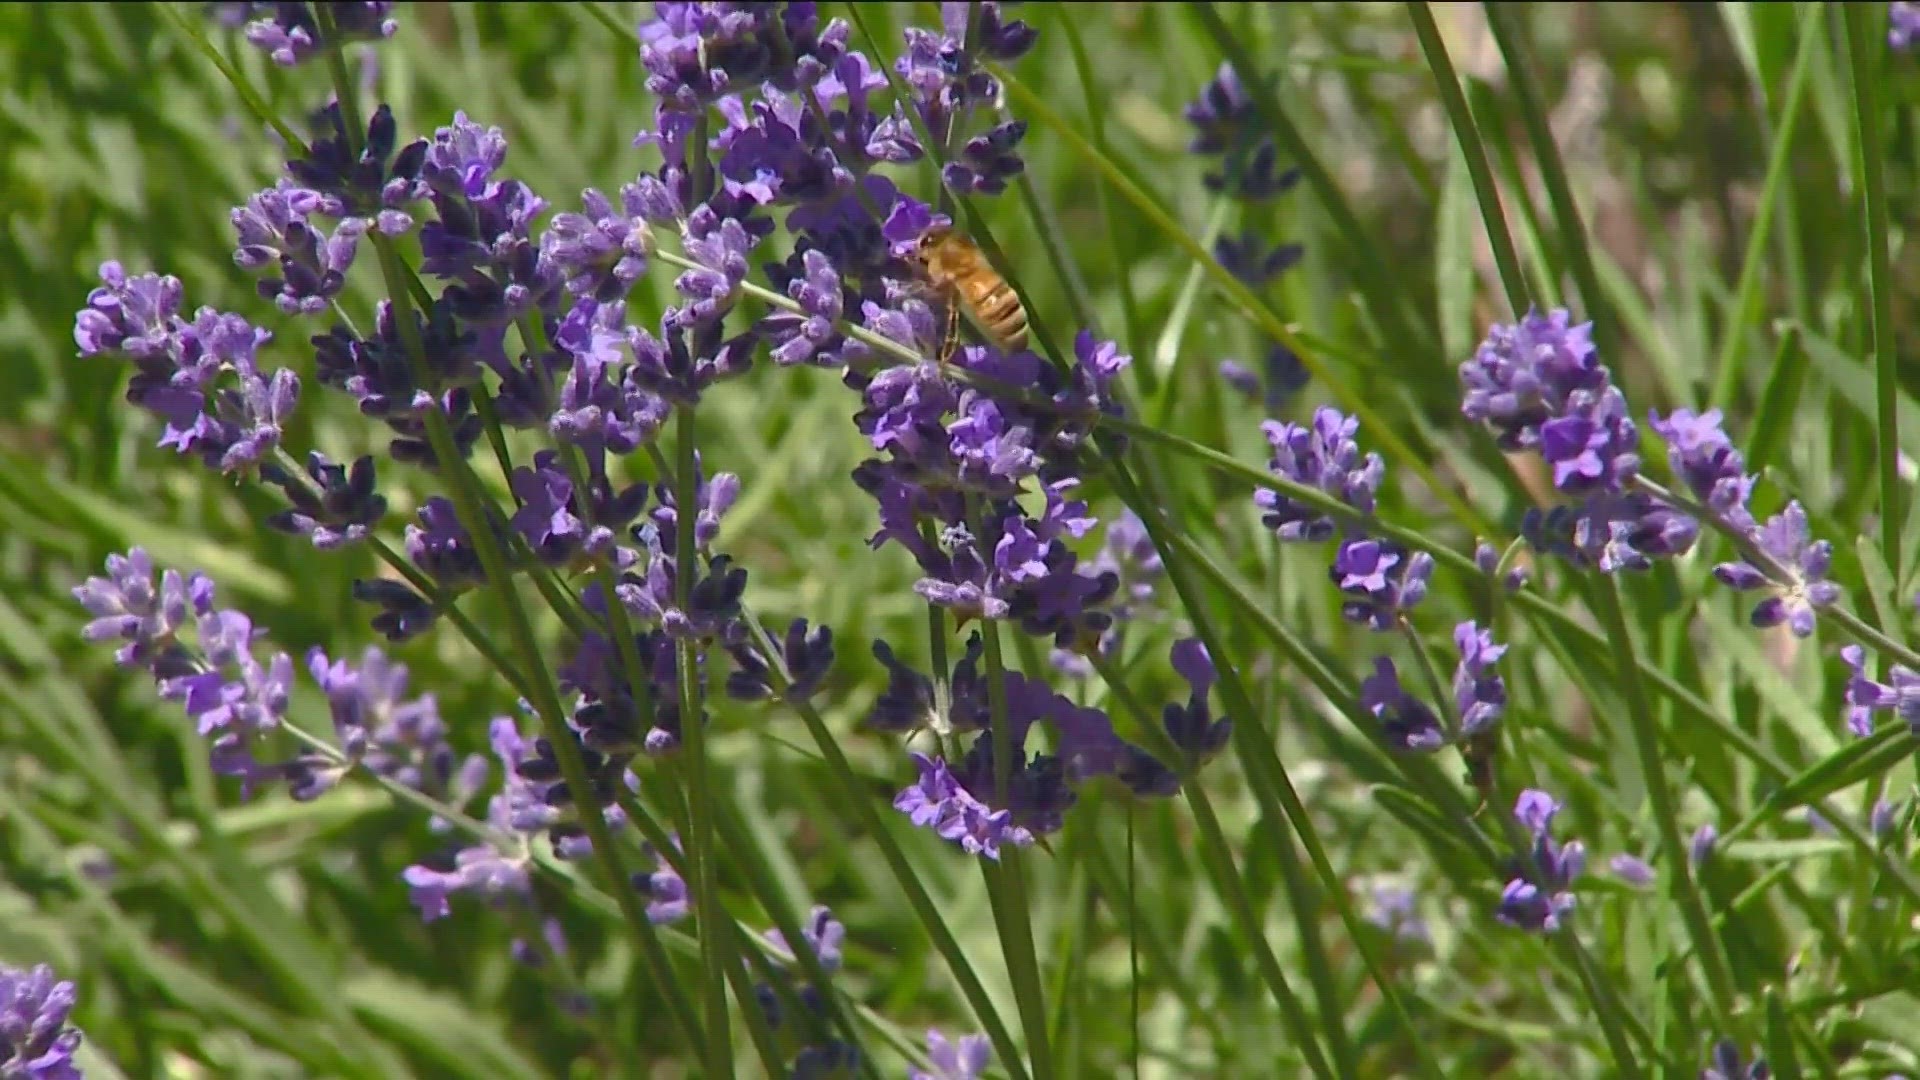 As Idahoans jump into gardening this spring, there are a few things to consider incorporating in your landscape to help some endangered pollinator friends.